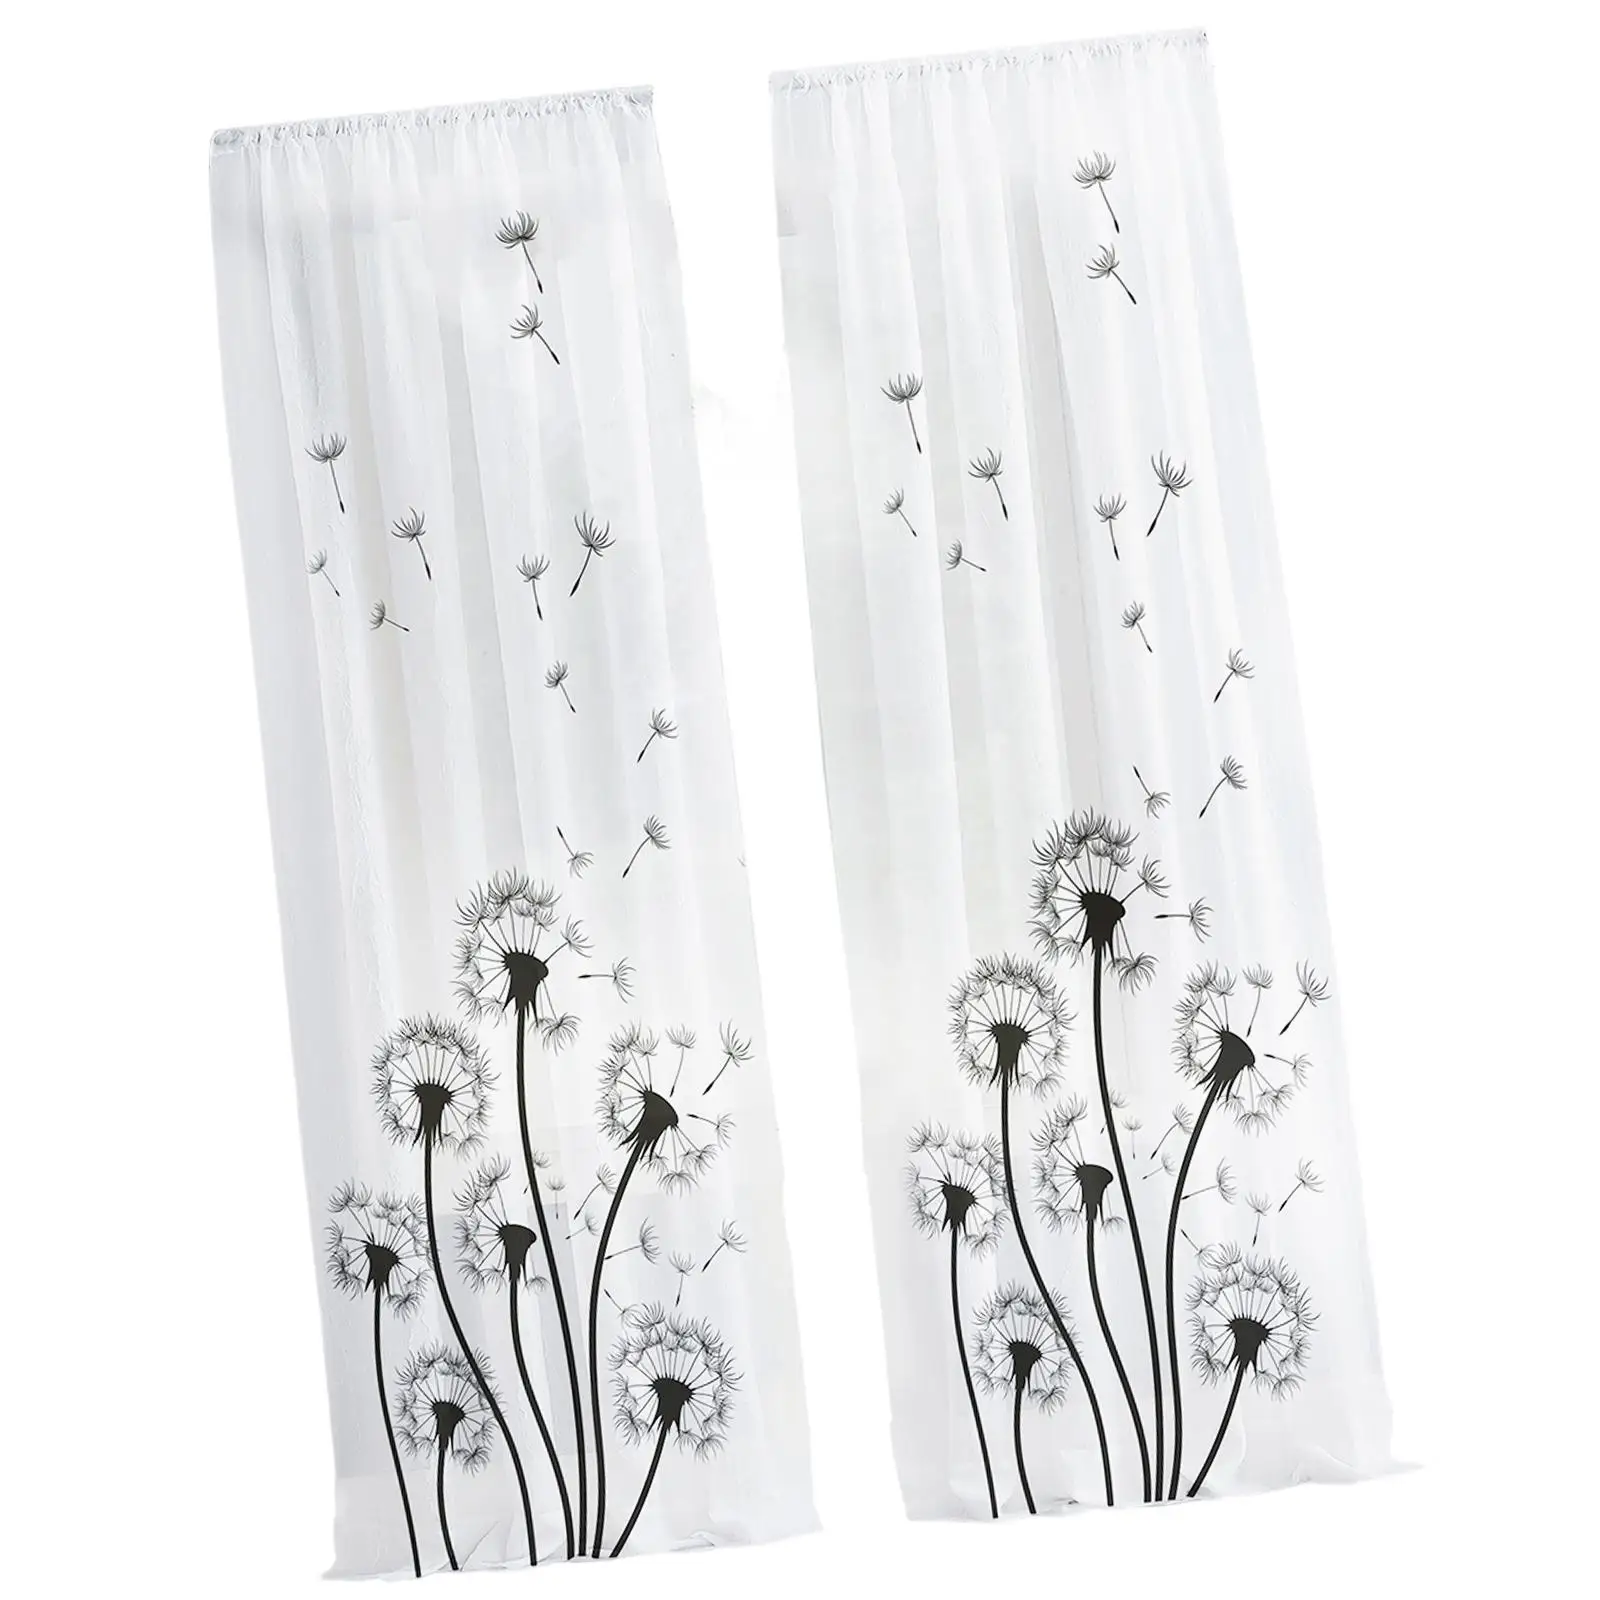 2 Pieces Window Curtains Breathable Accessory Filtering Window Curtains Gauze